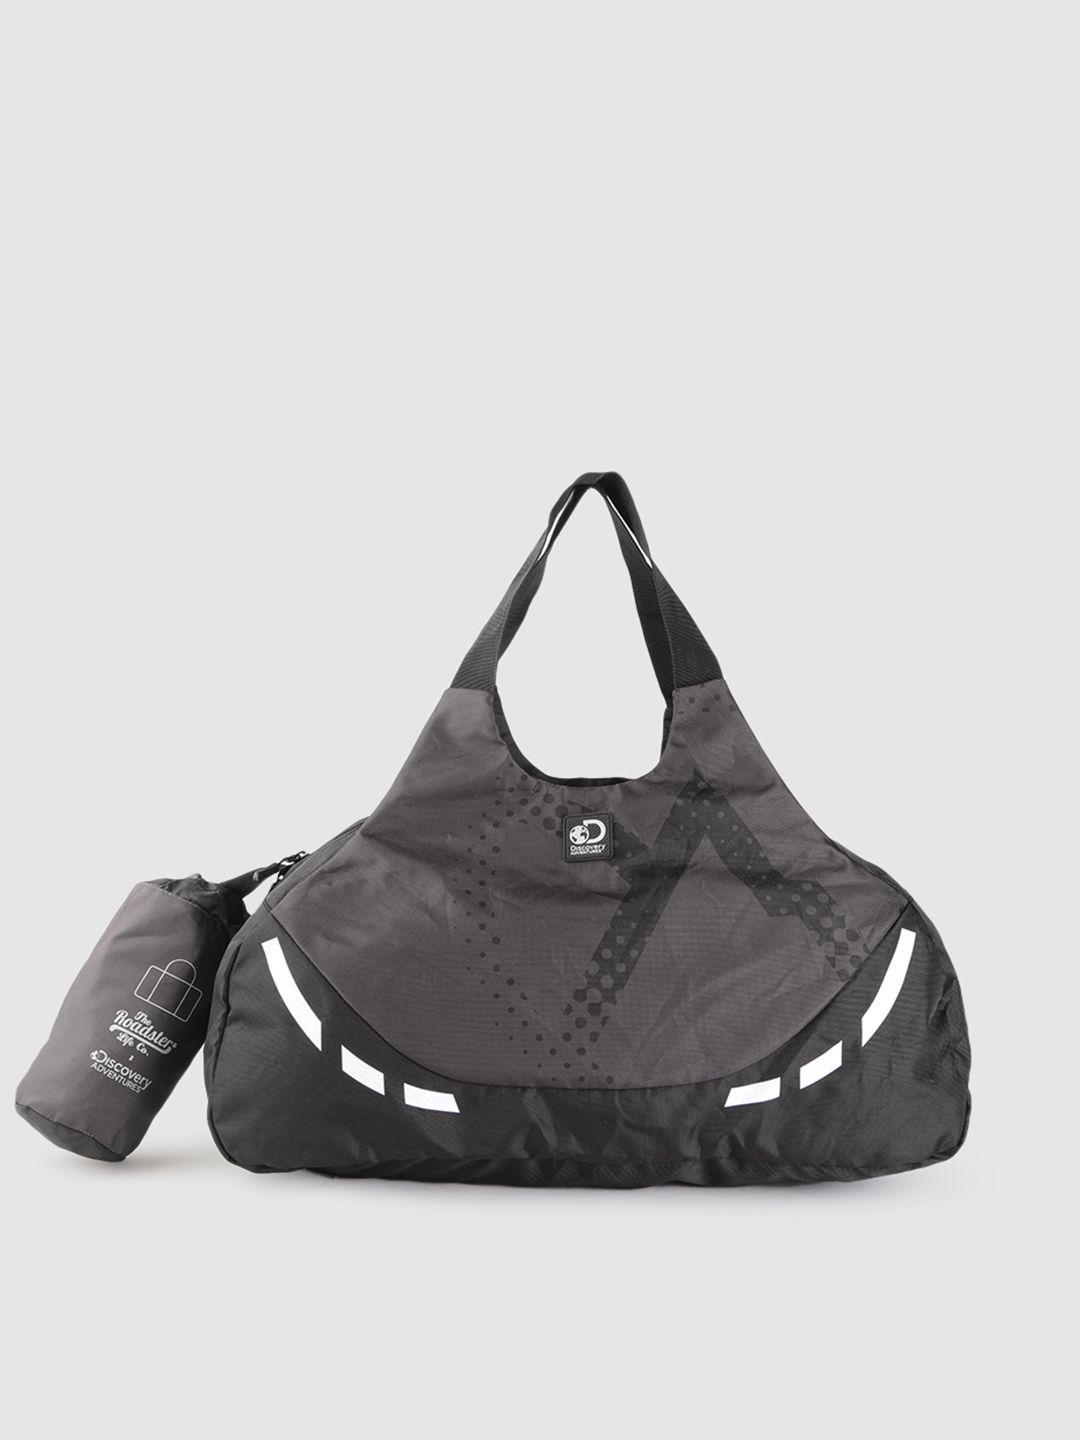 the roadster lifestyle co x discovery adventures unisex black & charcoal grey printed foldable duffel bag